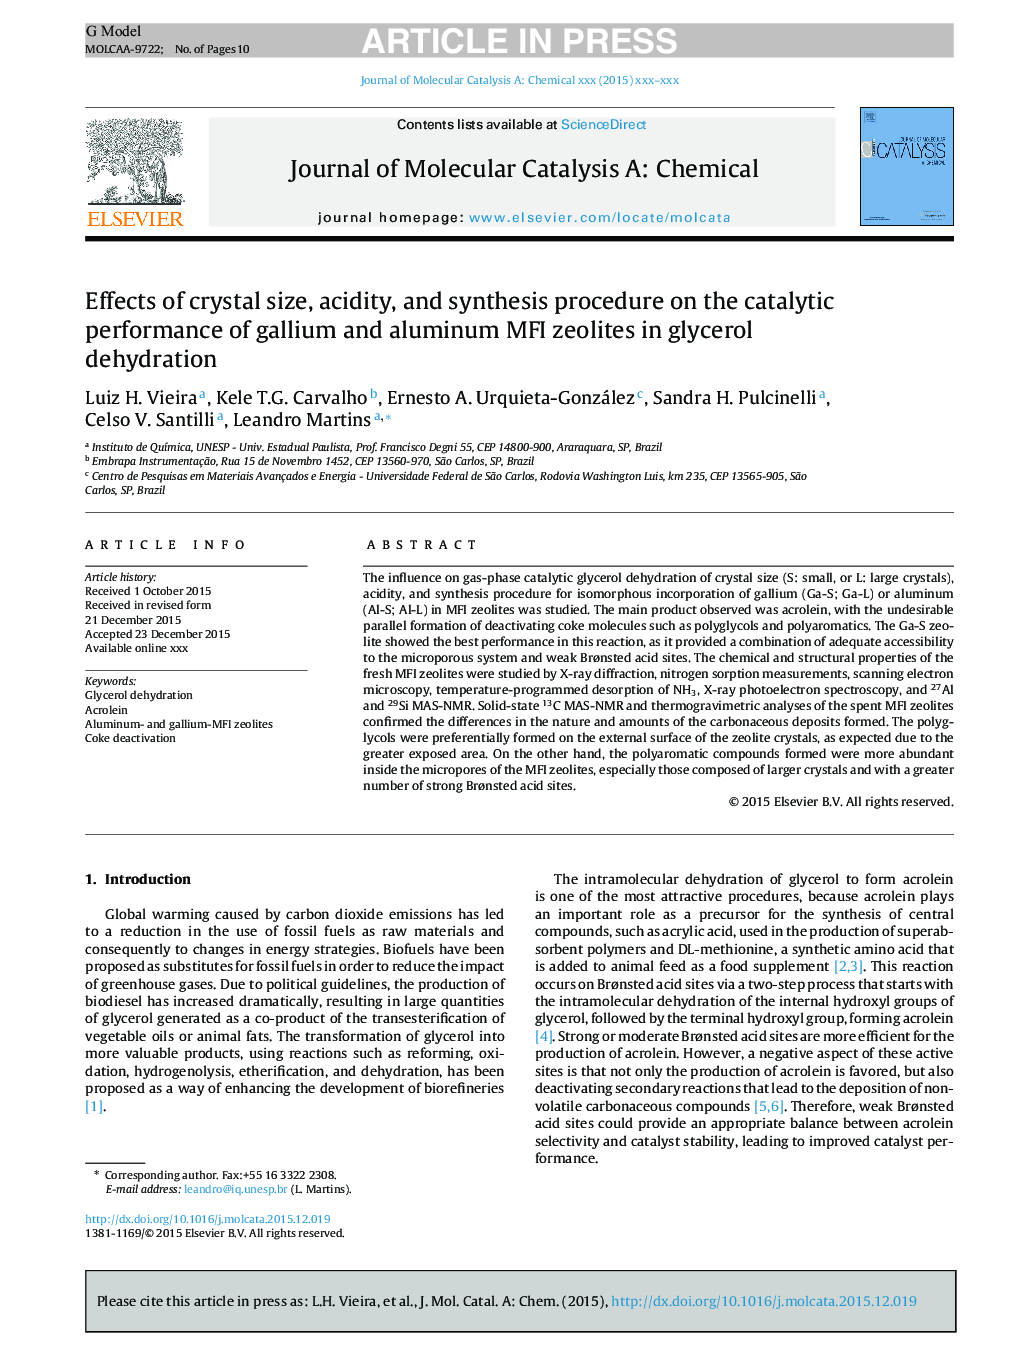 Effects of crystal size, acidity, and synthesis procedure on the catalytic performance of gallium and aluminum MFI zeolites in glycerol dehydration